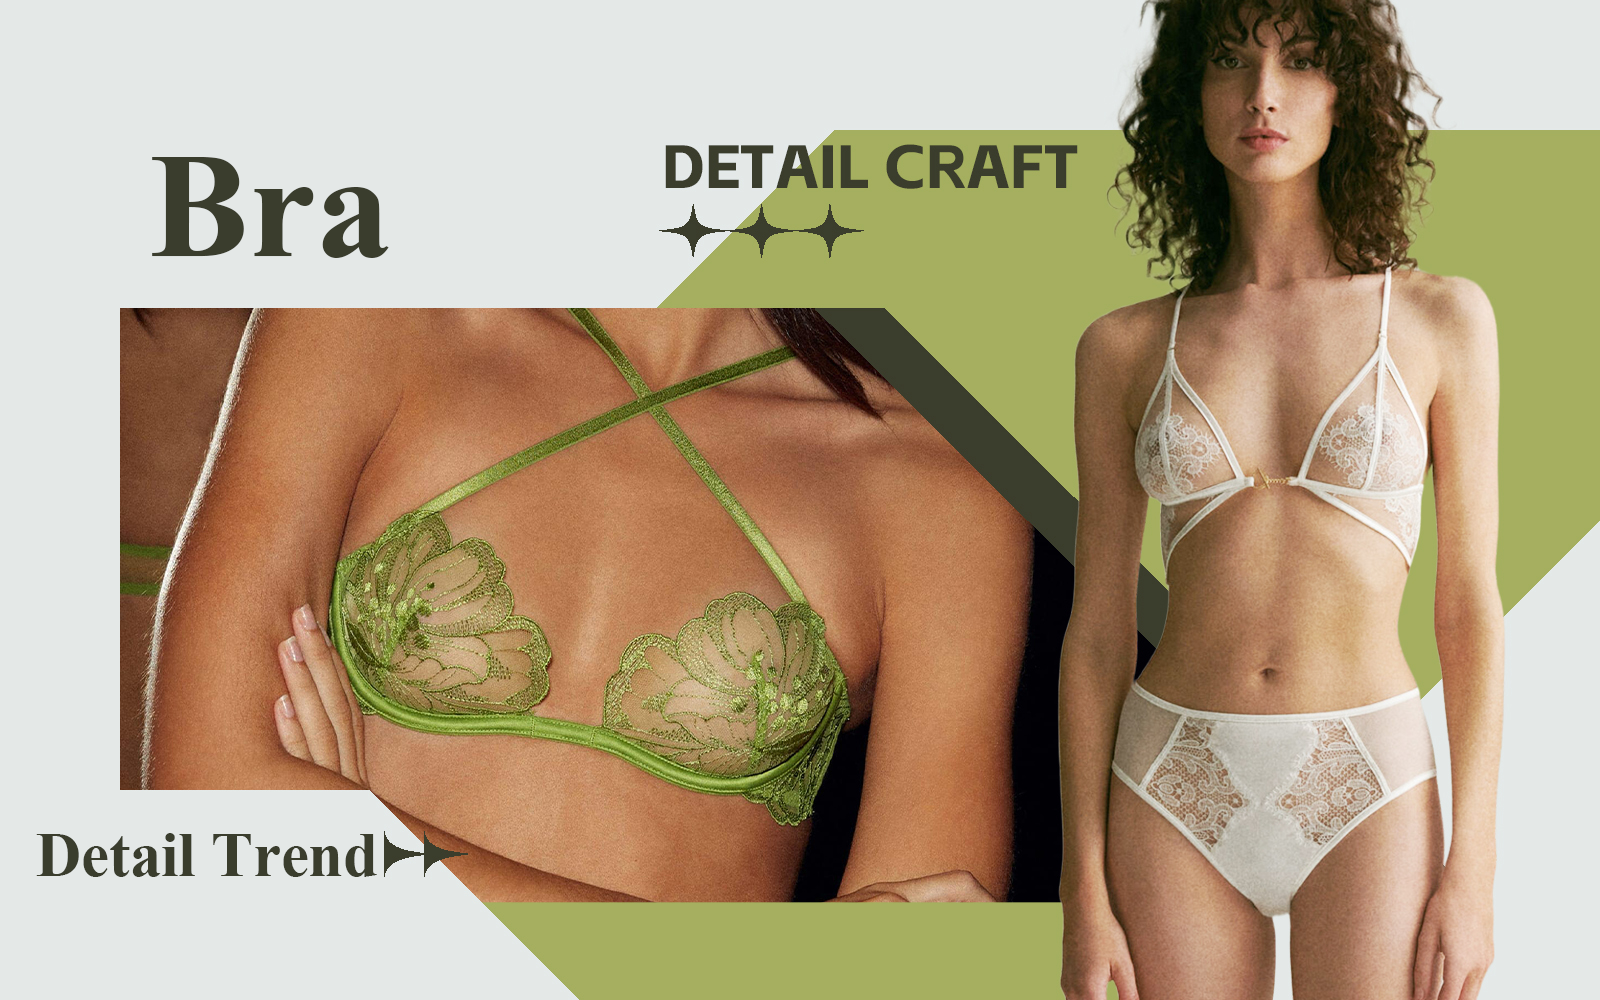 Transparent Cup -- The Detail & Craft Trend for Women's Bra